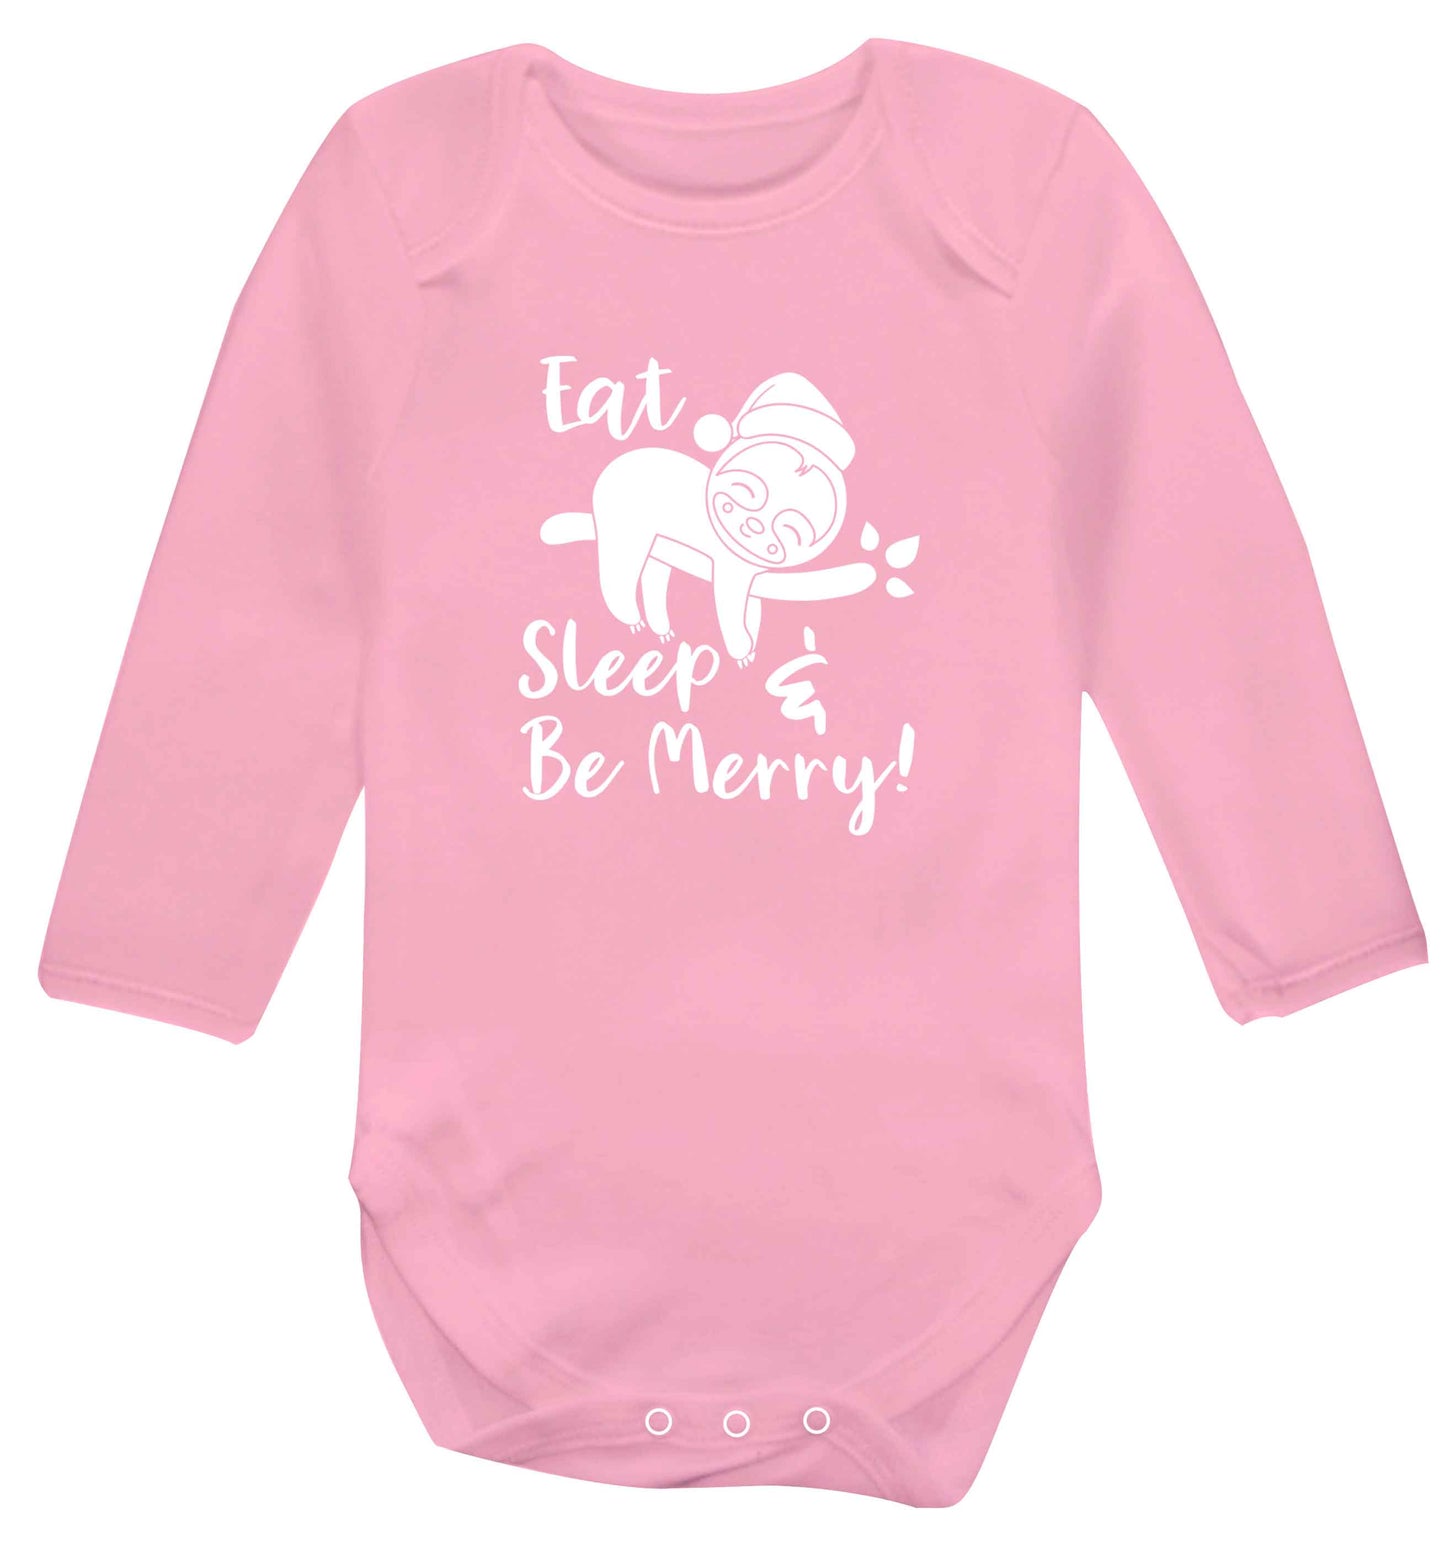 Merry Slothmas baby vest long sleeved pale pink 6-12 months